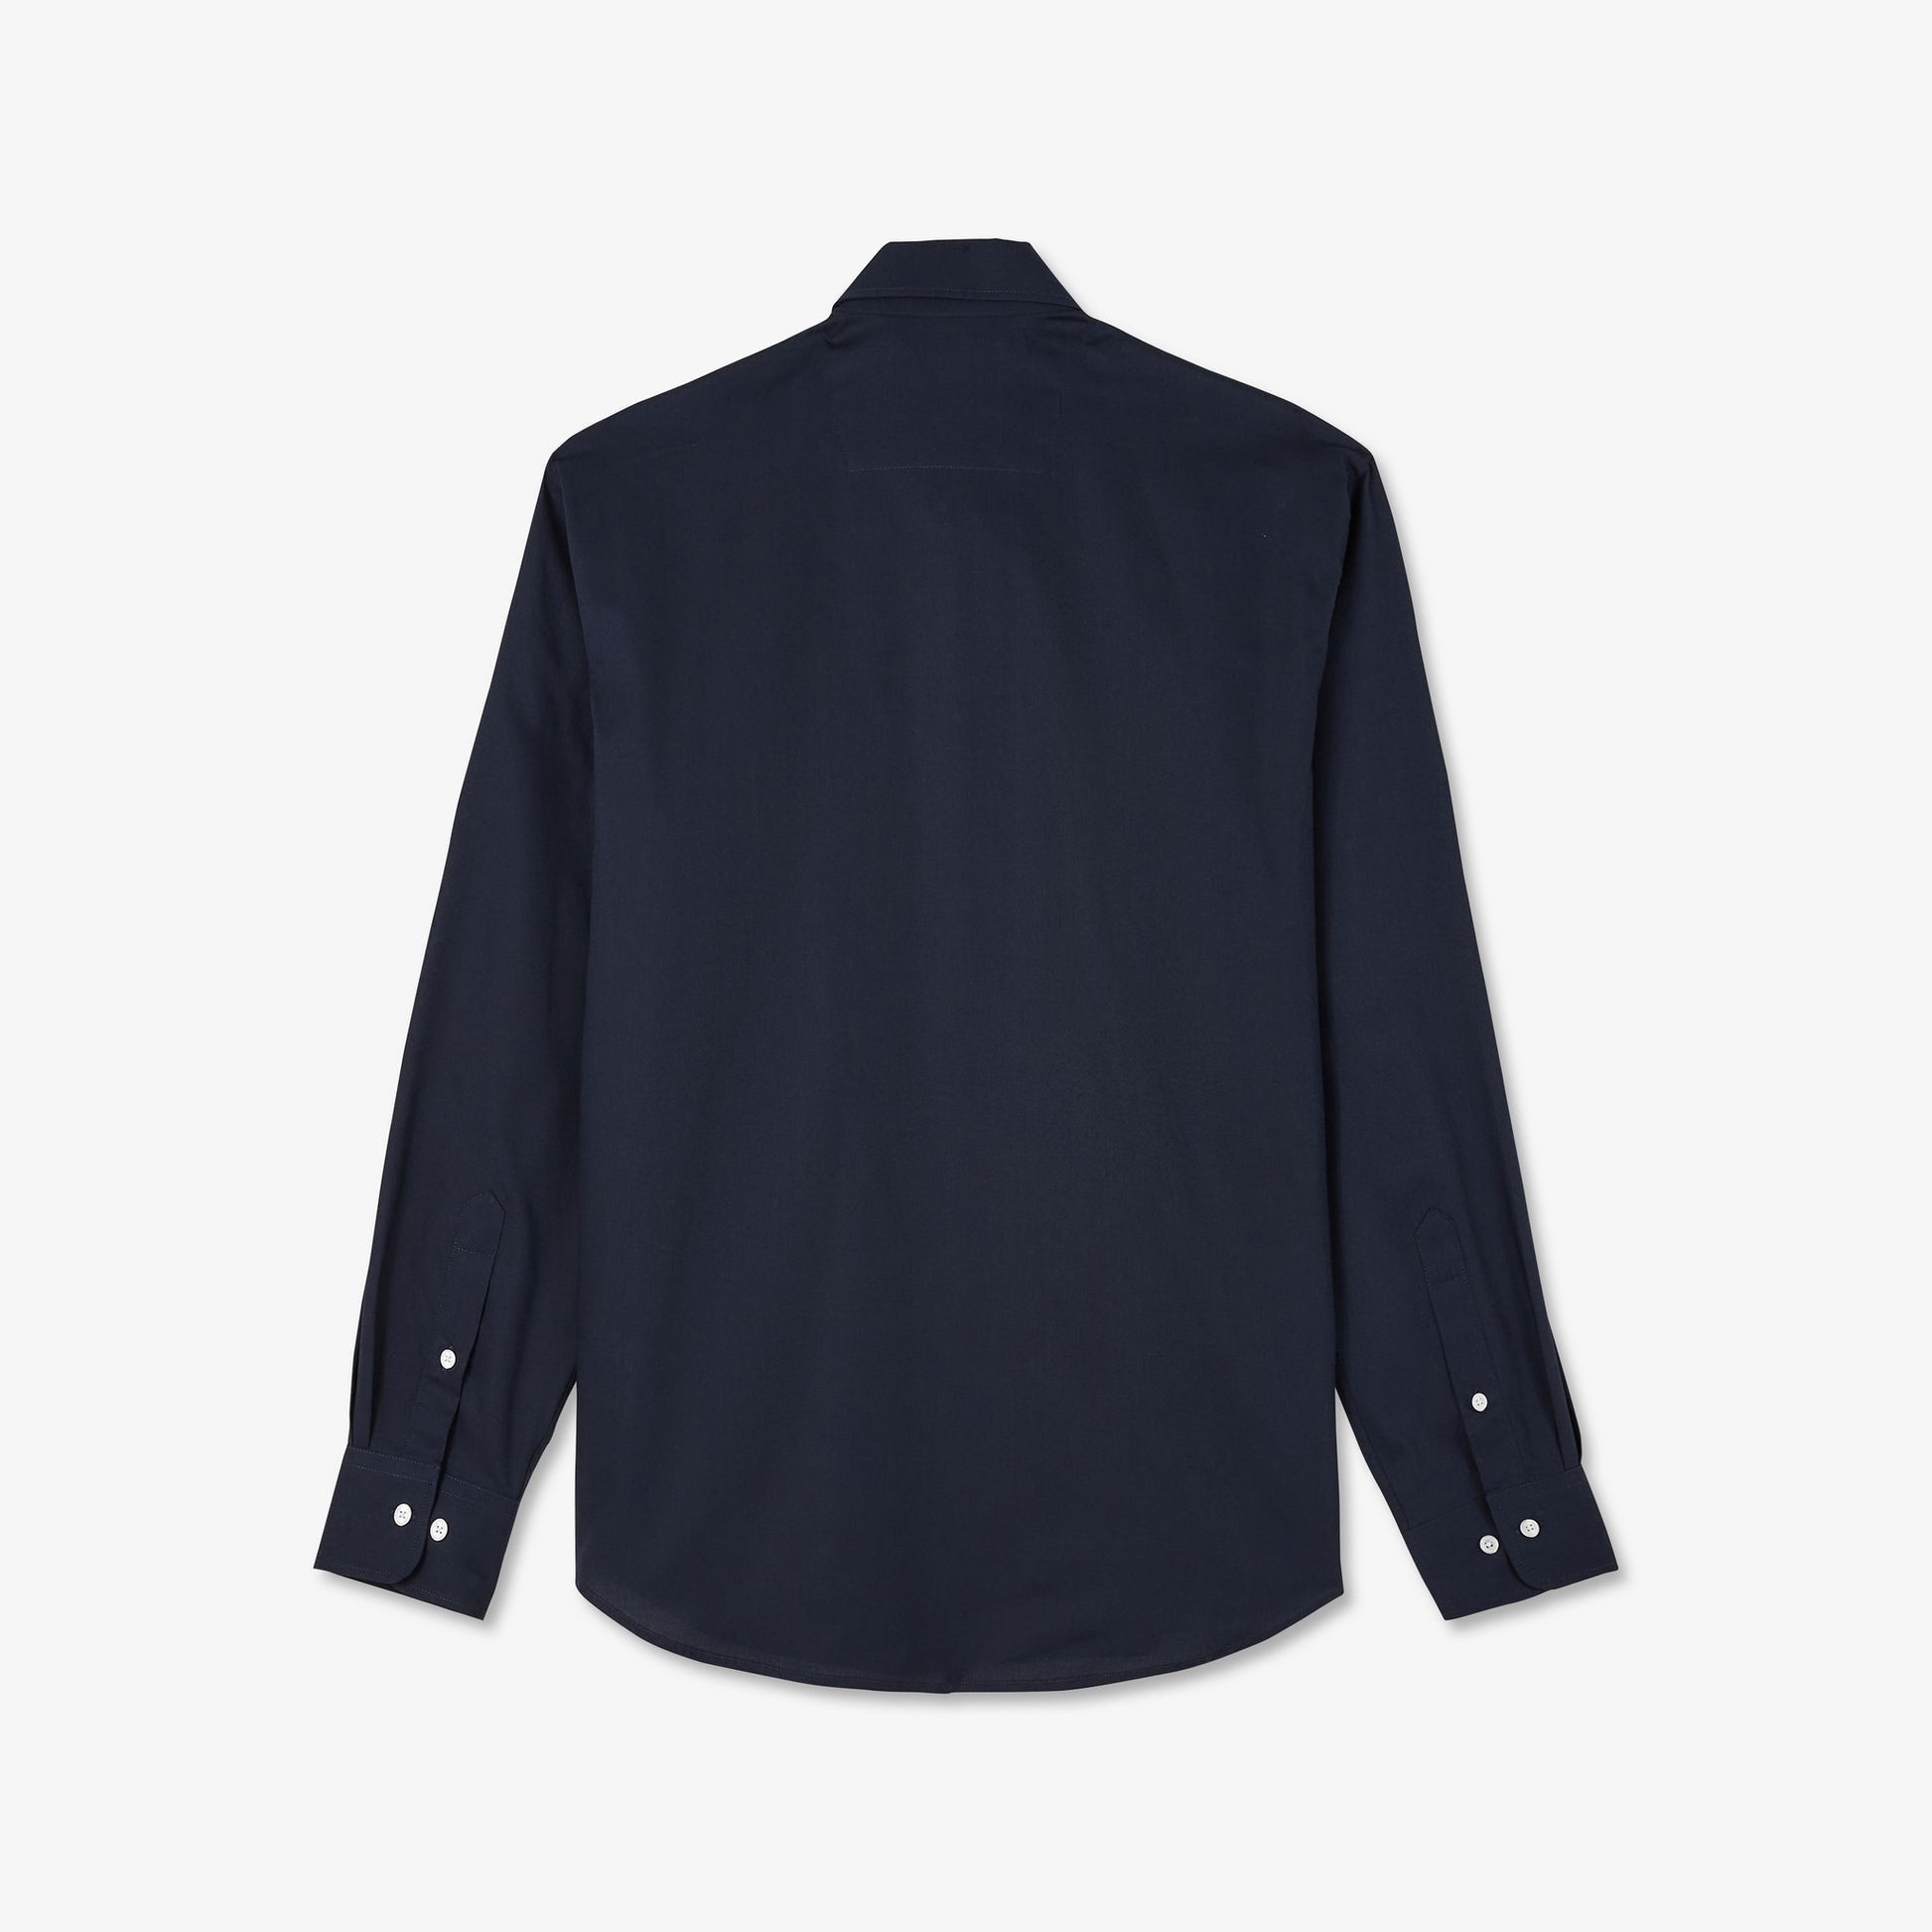 Dark Blue Shirt With No. 10 Embroidery_H23CHECL0002_BLF_05